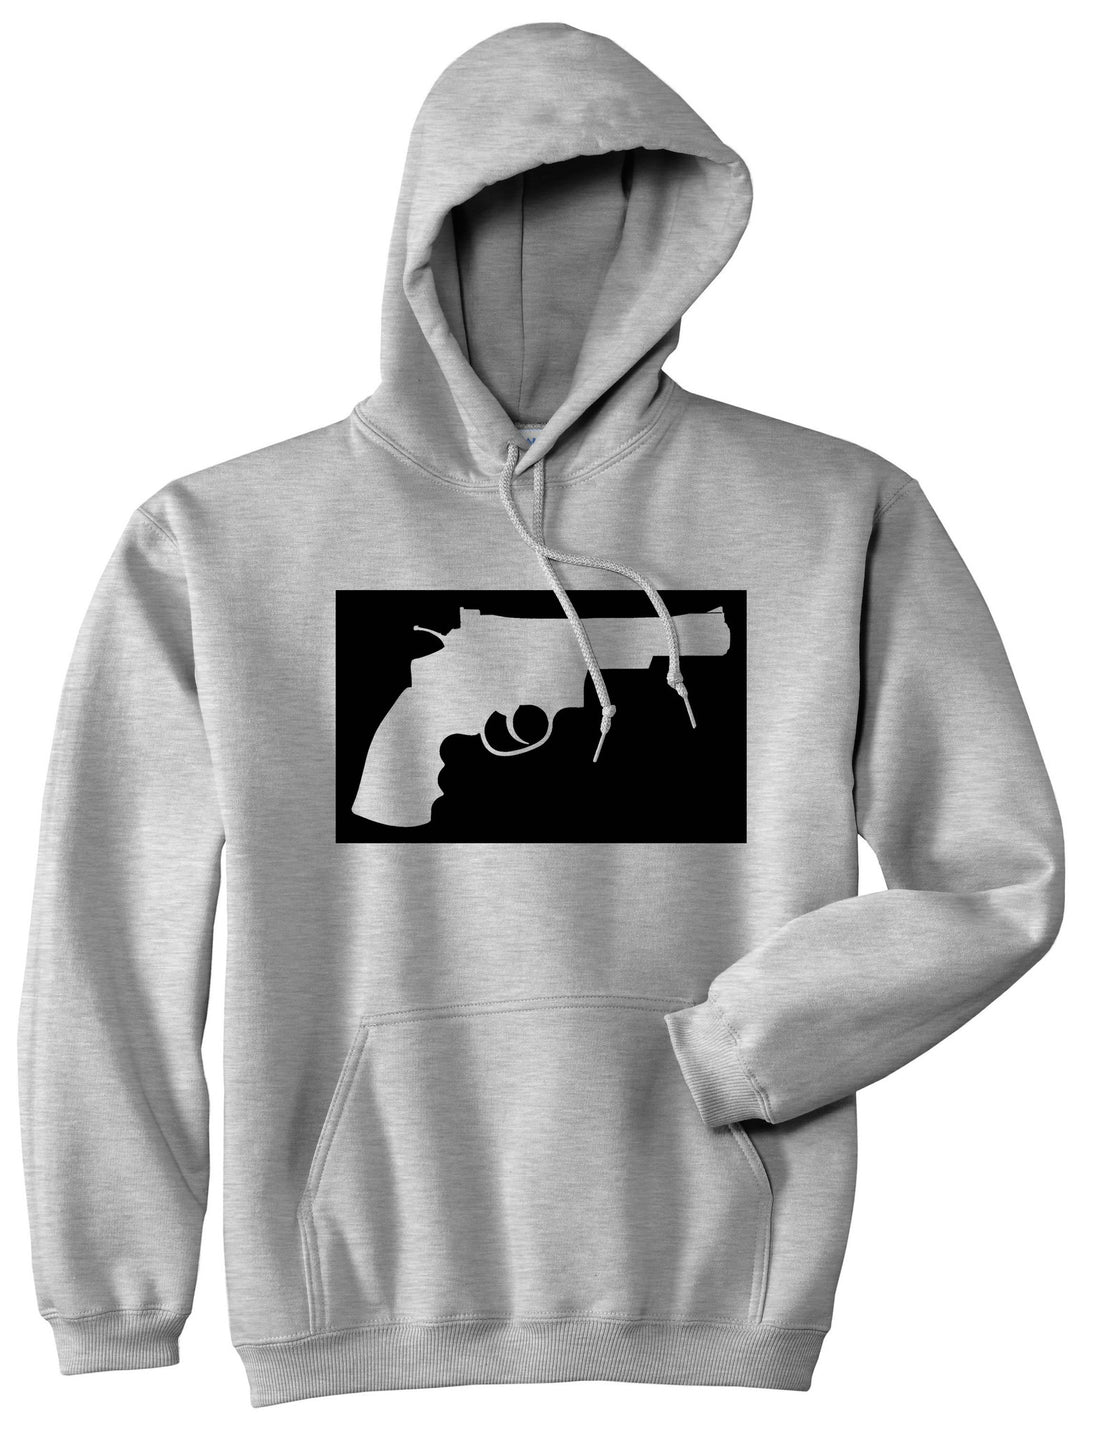 Gun Silhouette Revolver 45 Chrome Boys Kids Pullover Hoodie Hoody in Grey By Kings Of NY